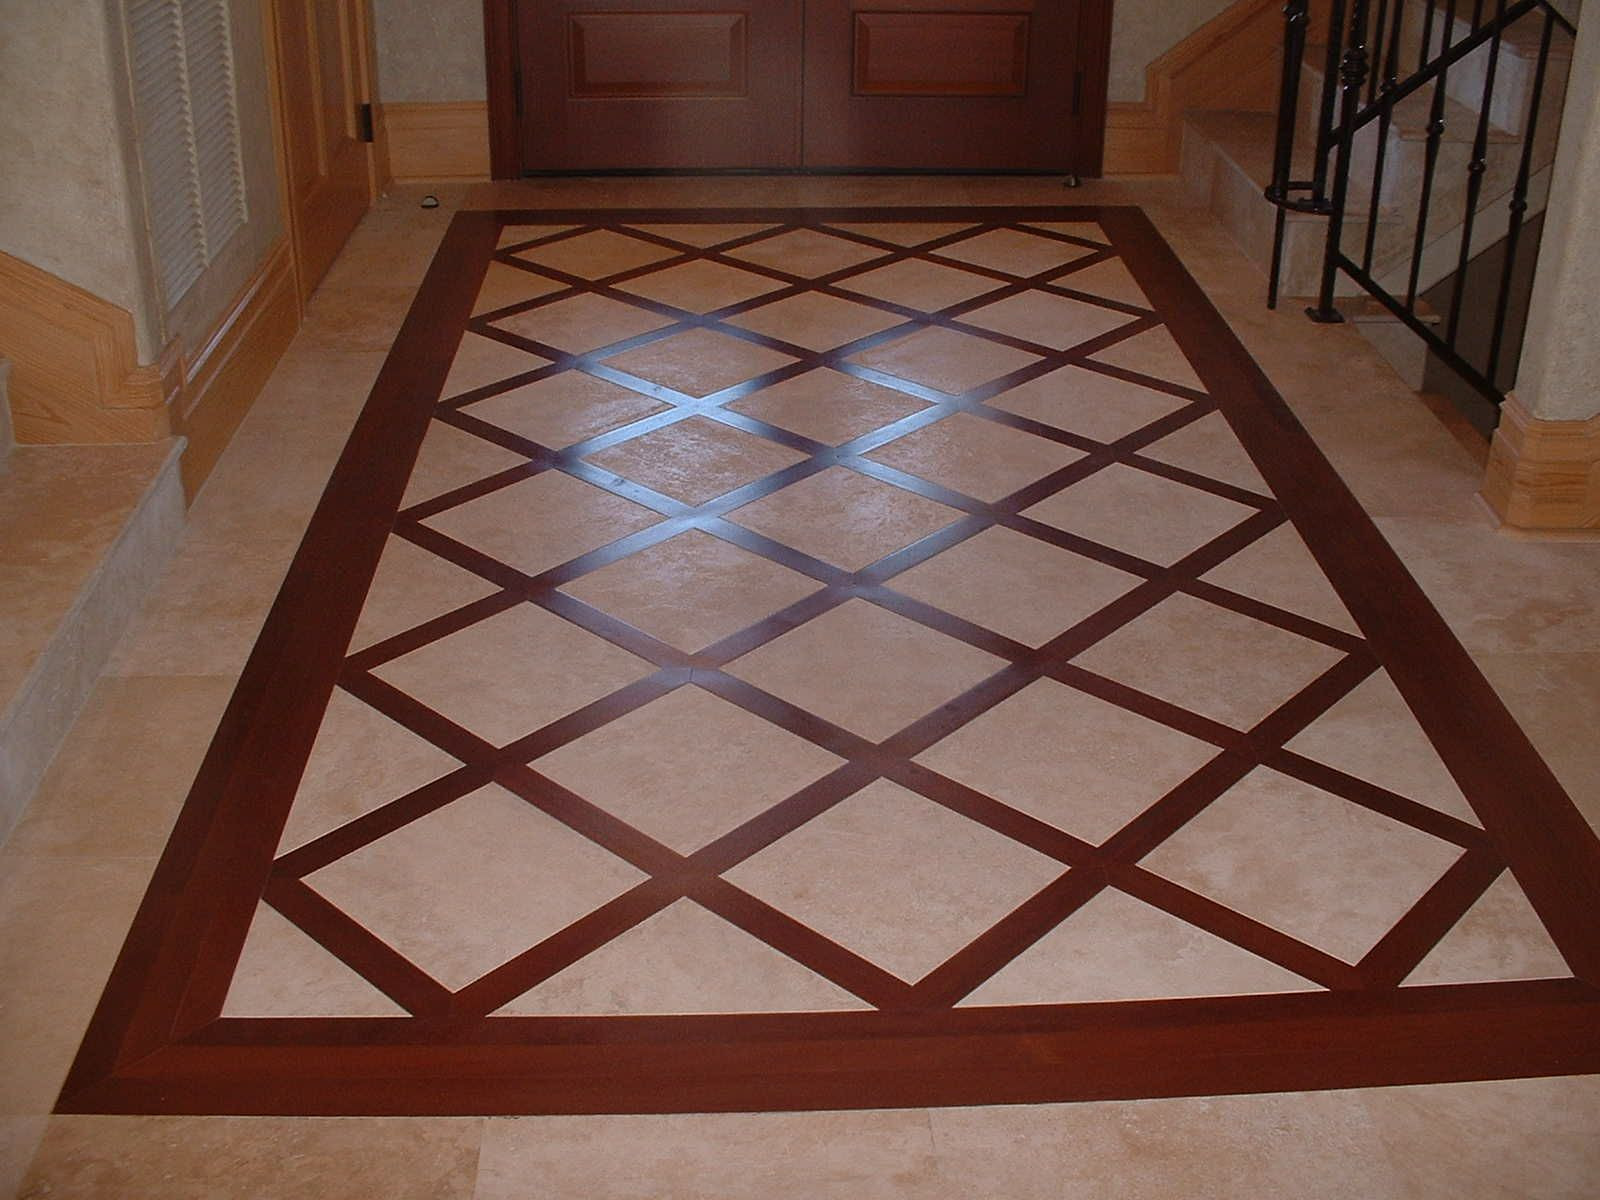 15 Stunning Hardwood Floor Borders Inlays 2024 free download hardwood floor borders inlays of image detail for installations masters touch wood floors page 3 throughout image detail for installations masters touch wood floors page 3